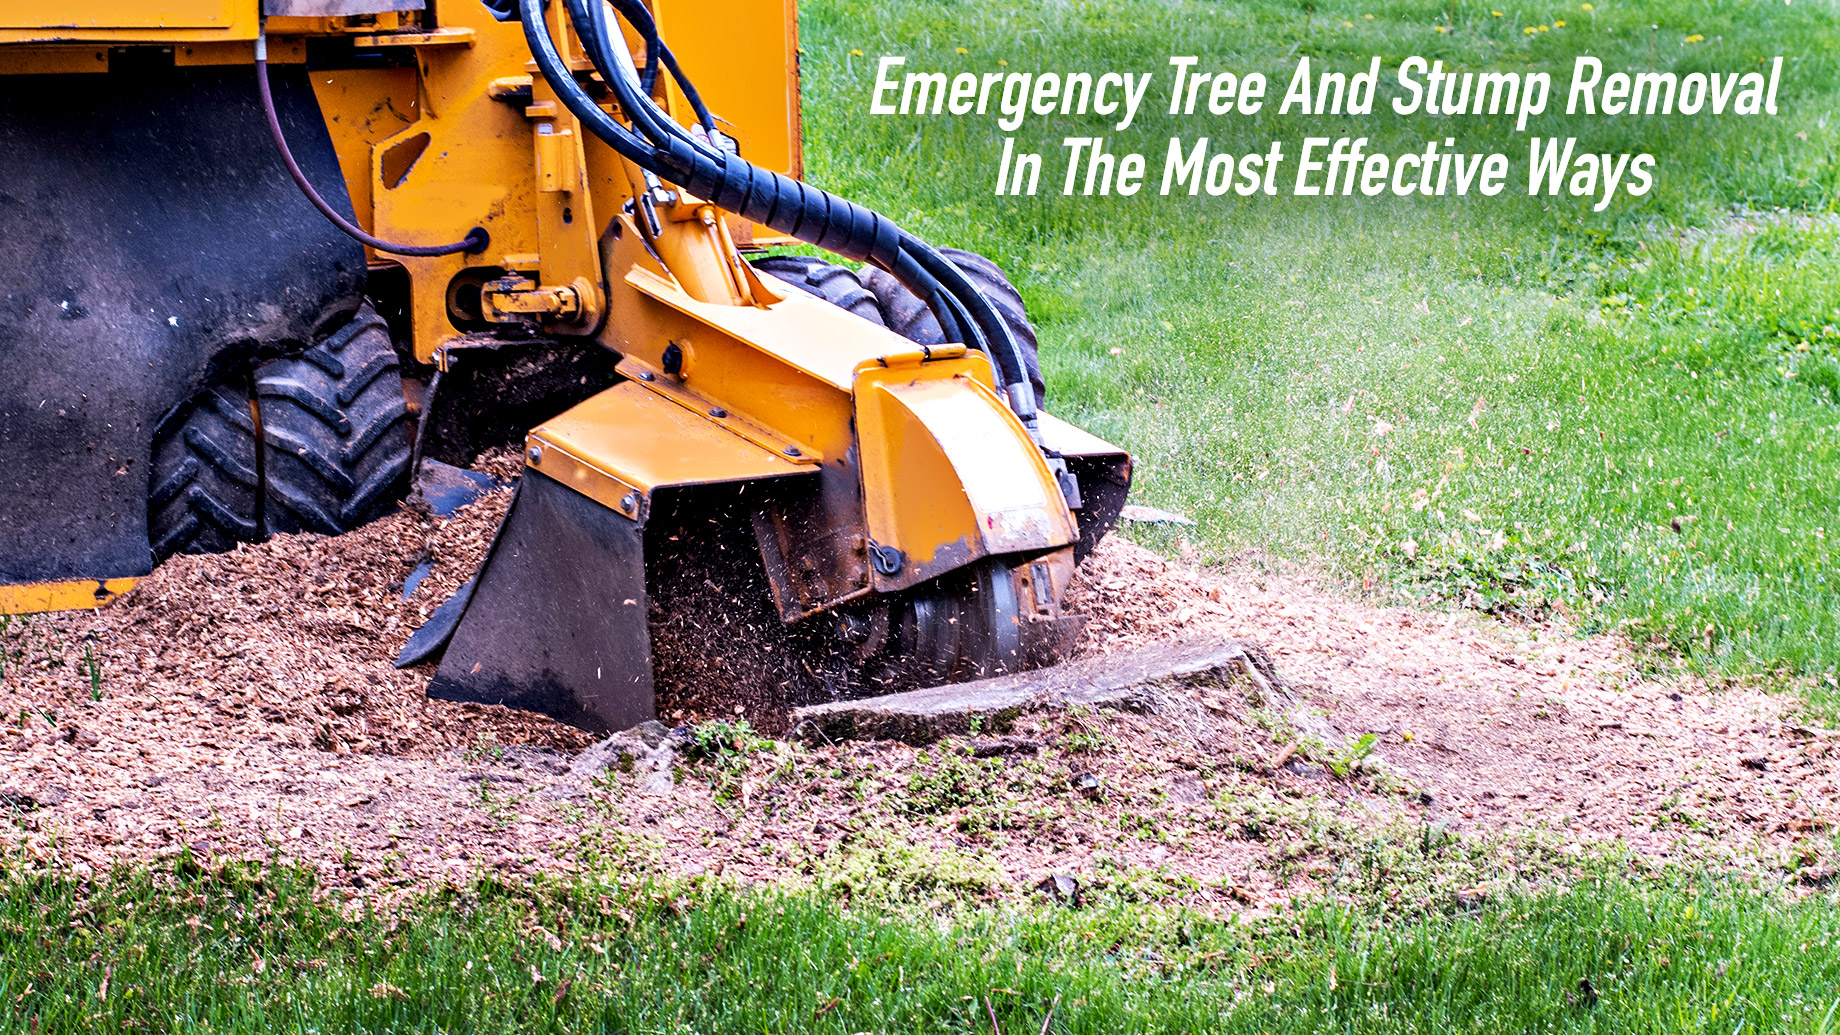 Emergency Tree And Stump Removal In The Most Effective Ways